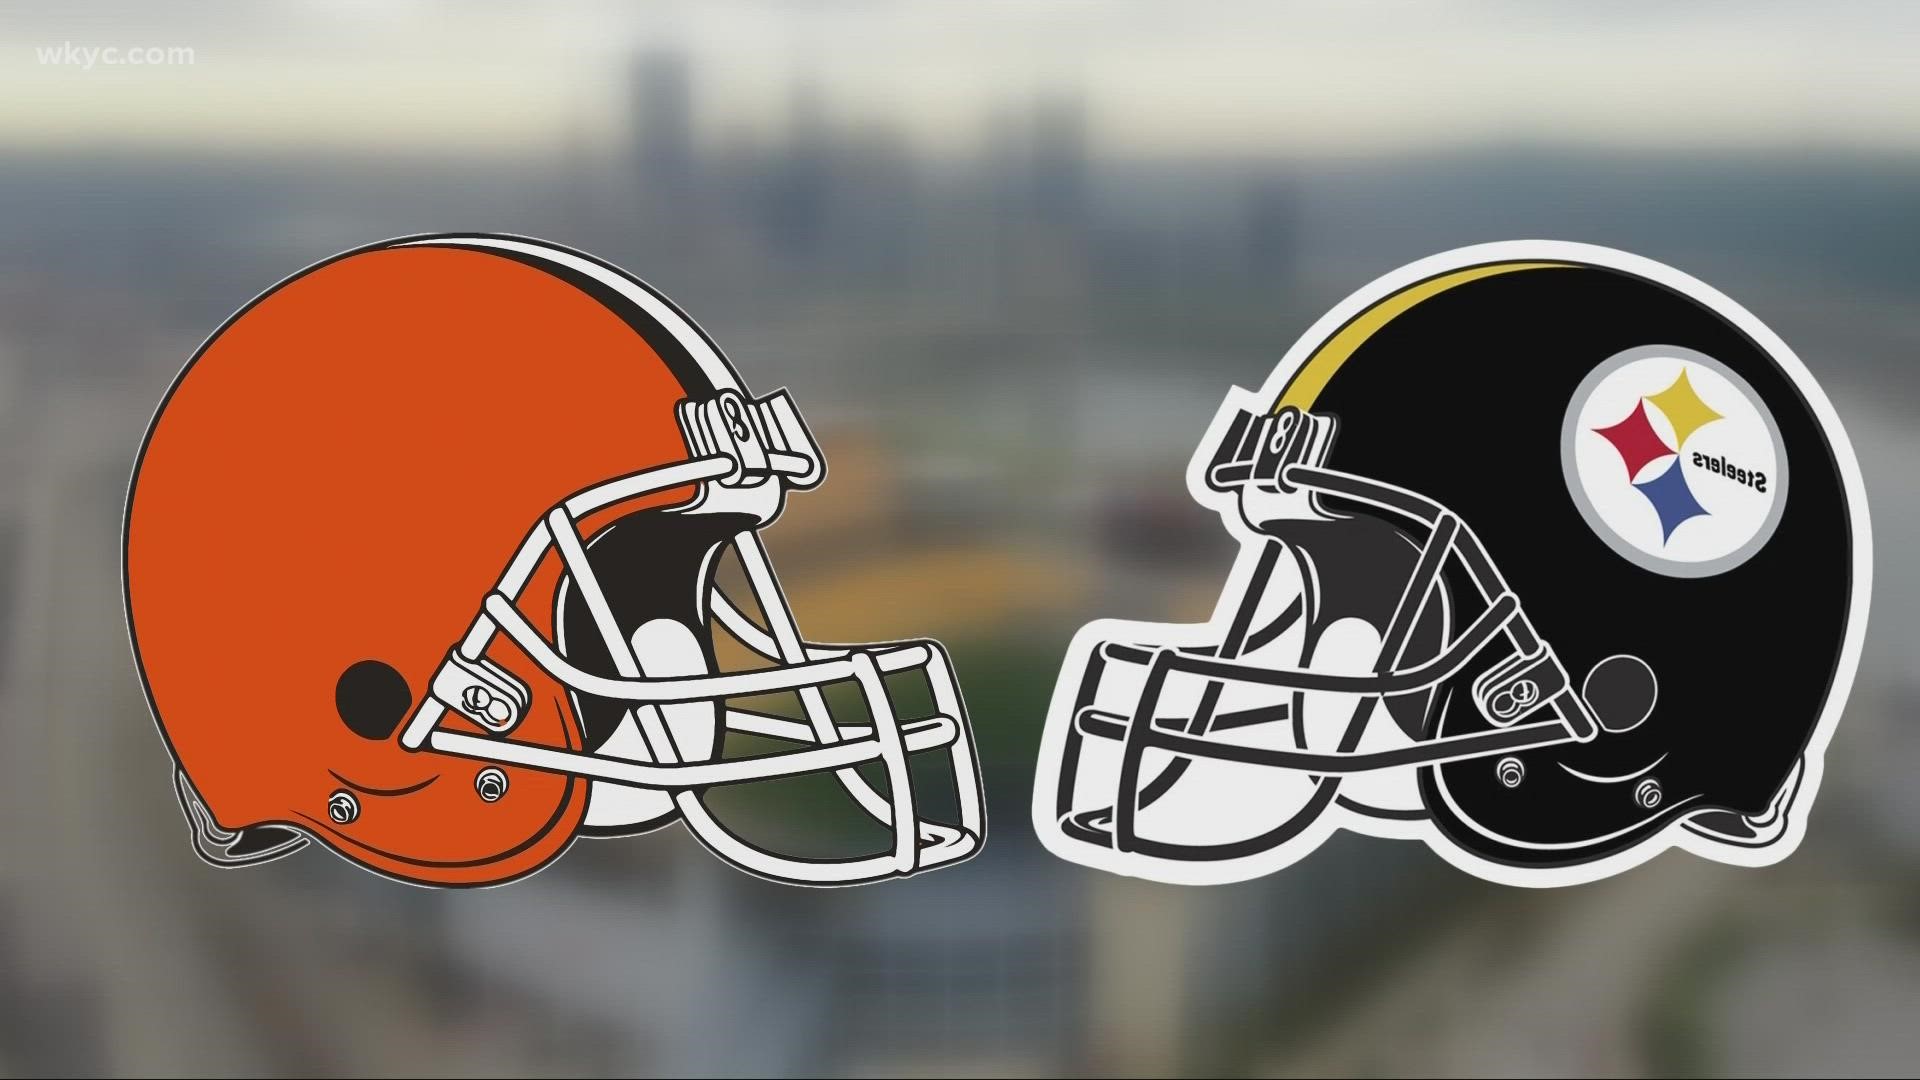 3News' Jay Crawford on the Browns' loss to the Steelers